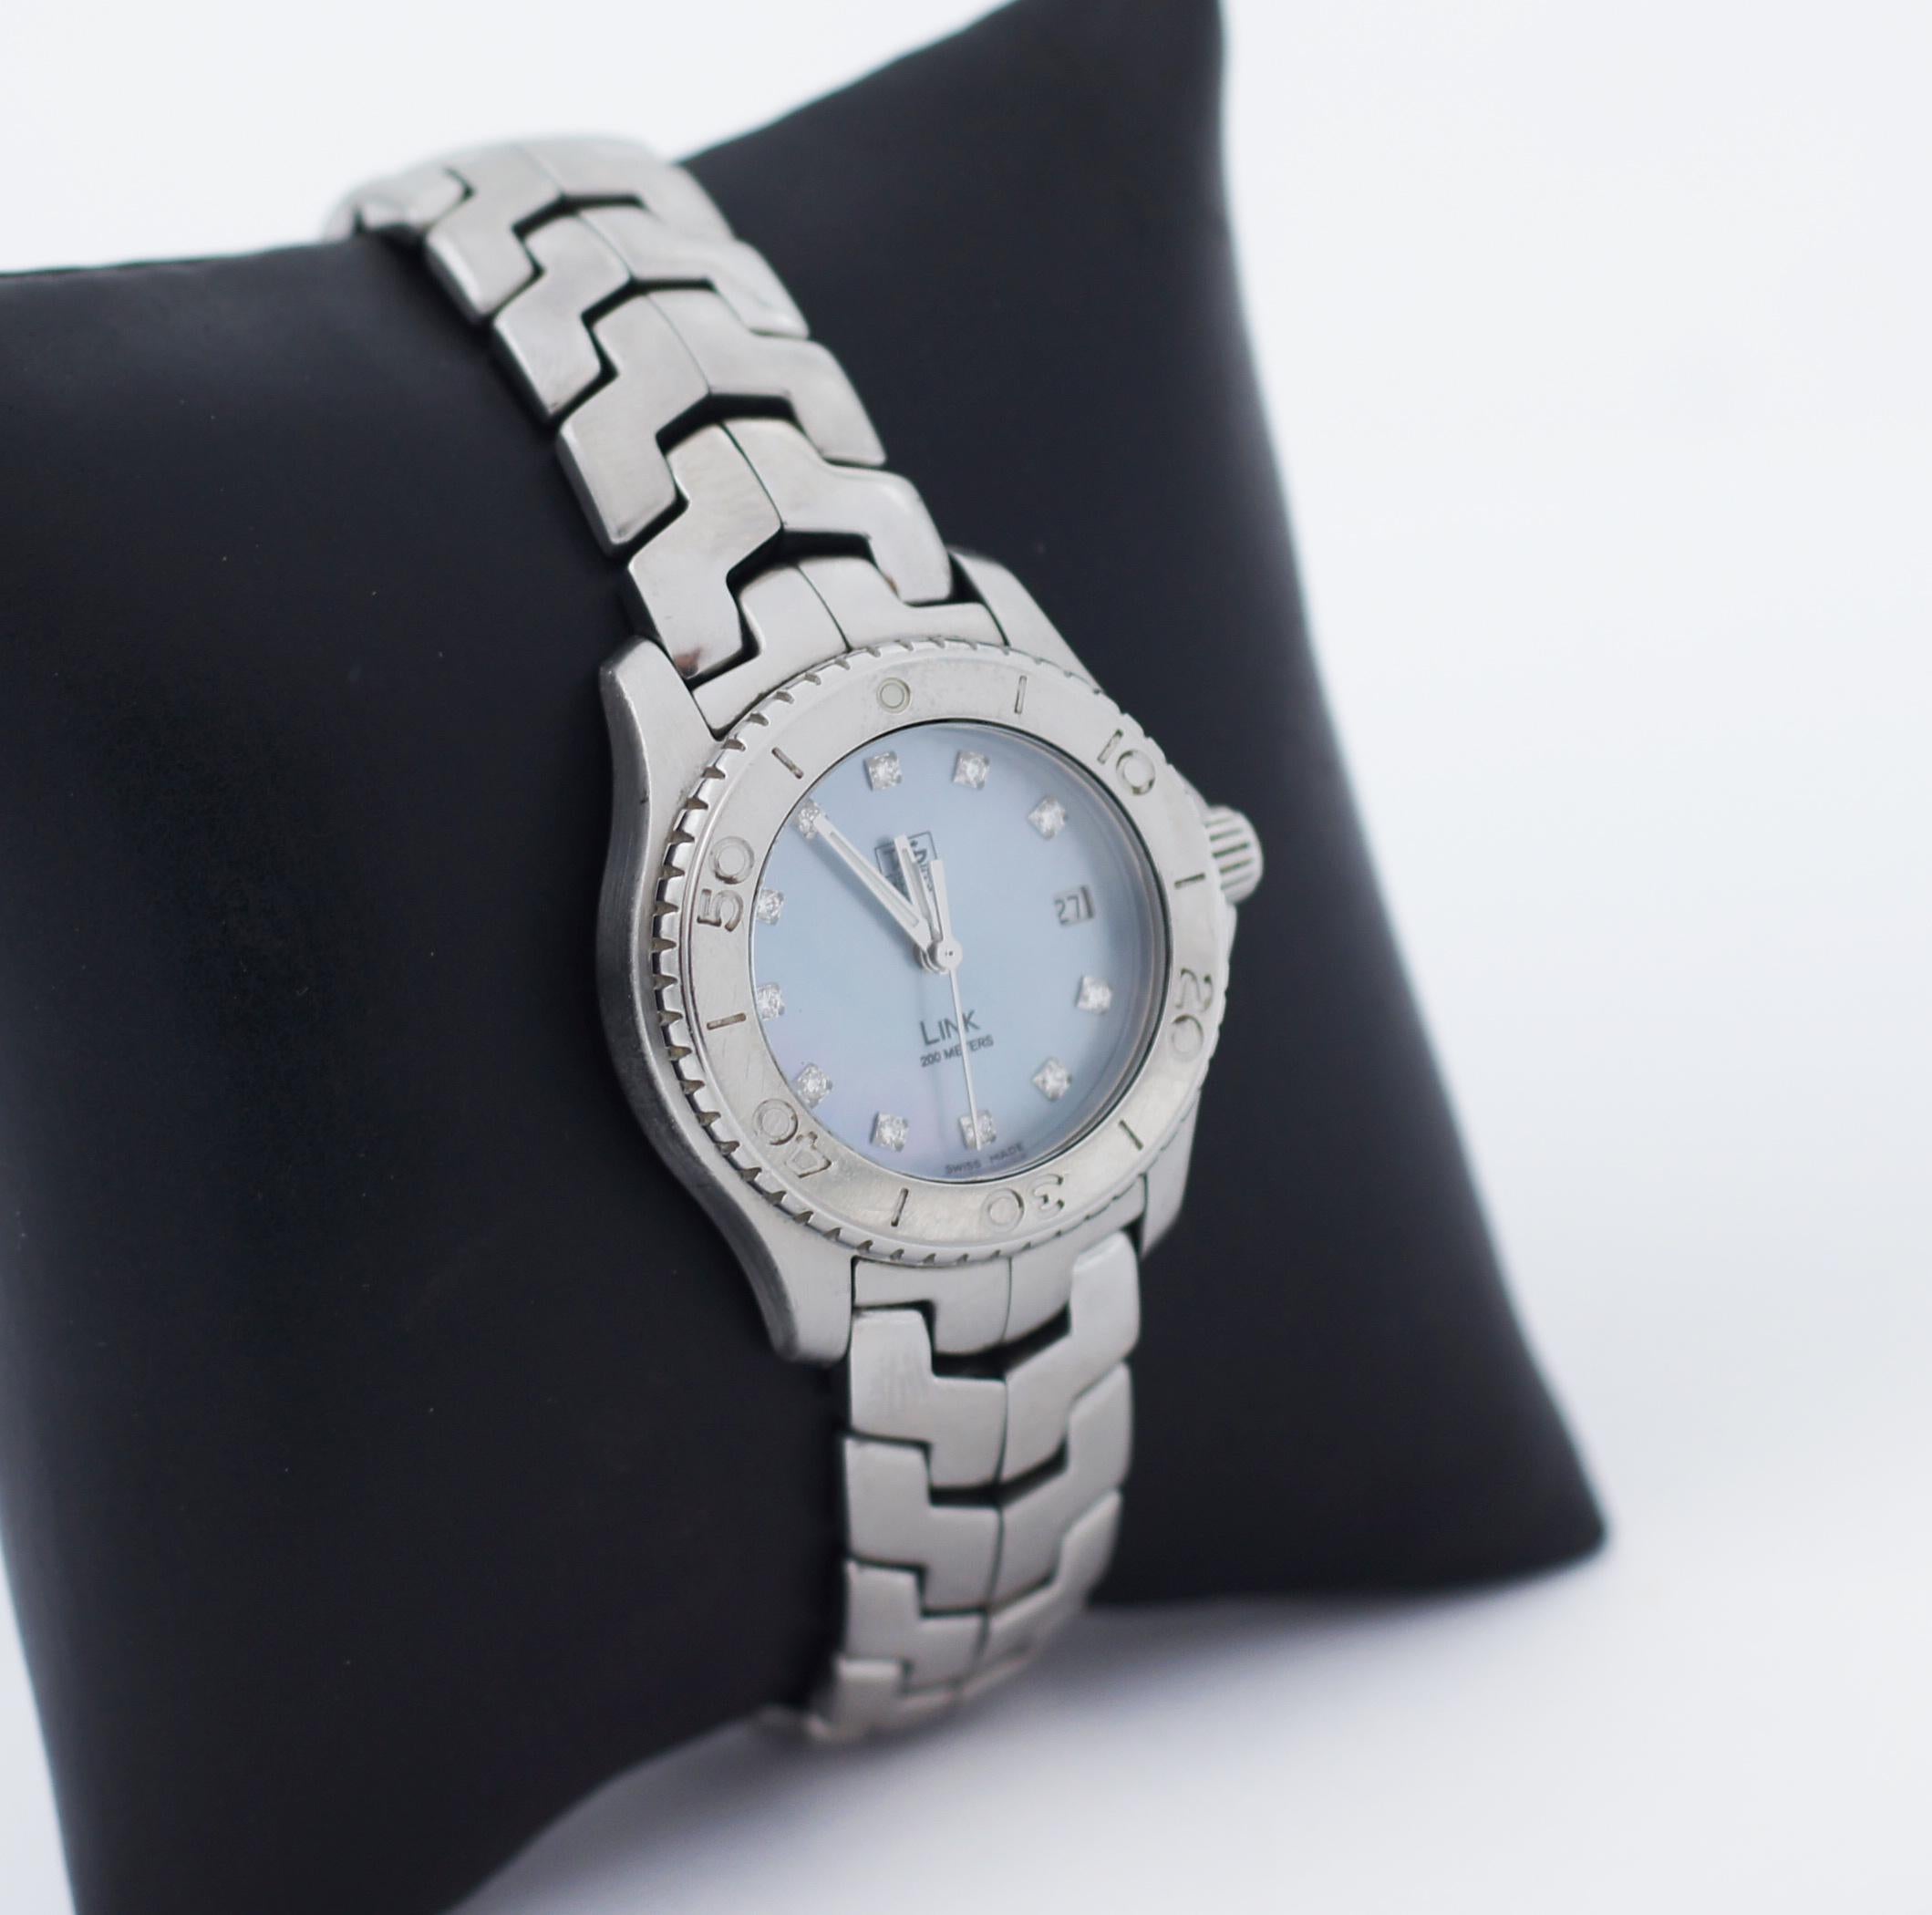 TAG HEUER
LINK
WJ1317-0
Swiss Made
Polished with Brushed Stainless Steel Case & Bracelet
Mother of Pearl Blue Dial Set with Diamonds
Diamond Hour Markers
11 Full Cut Diamonds Set on Dial (Approx. 0.081 ct)
Polished Stainless Steel Bezel with